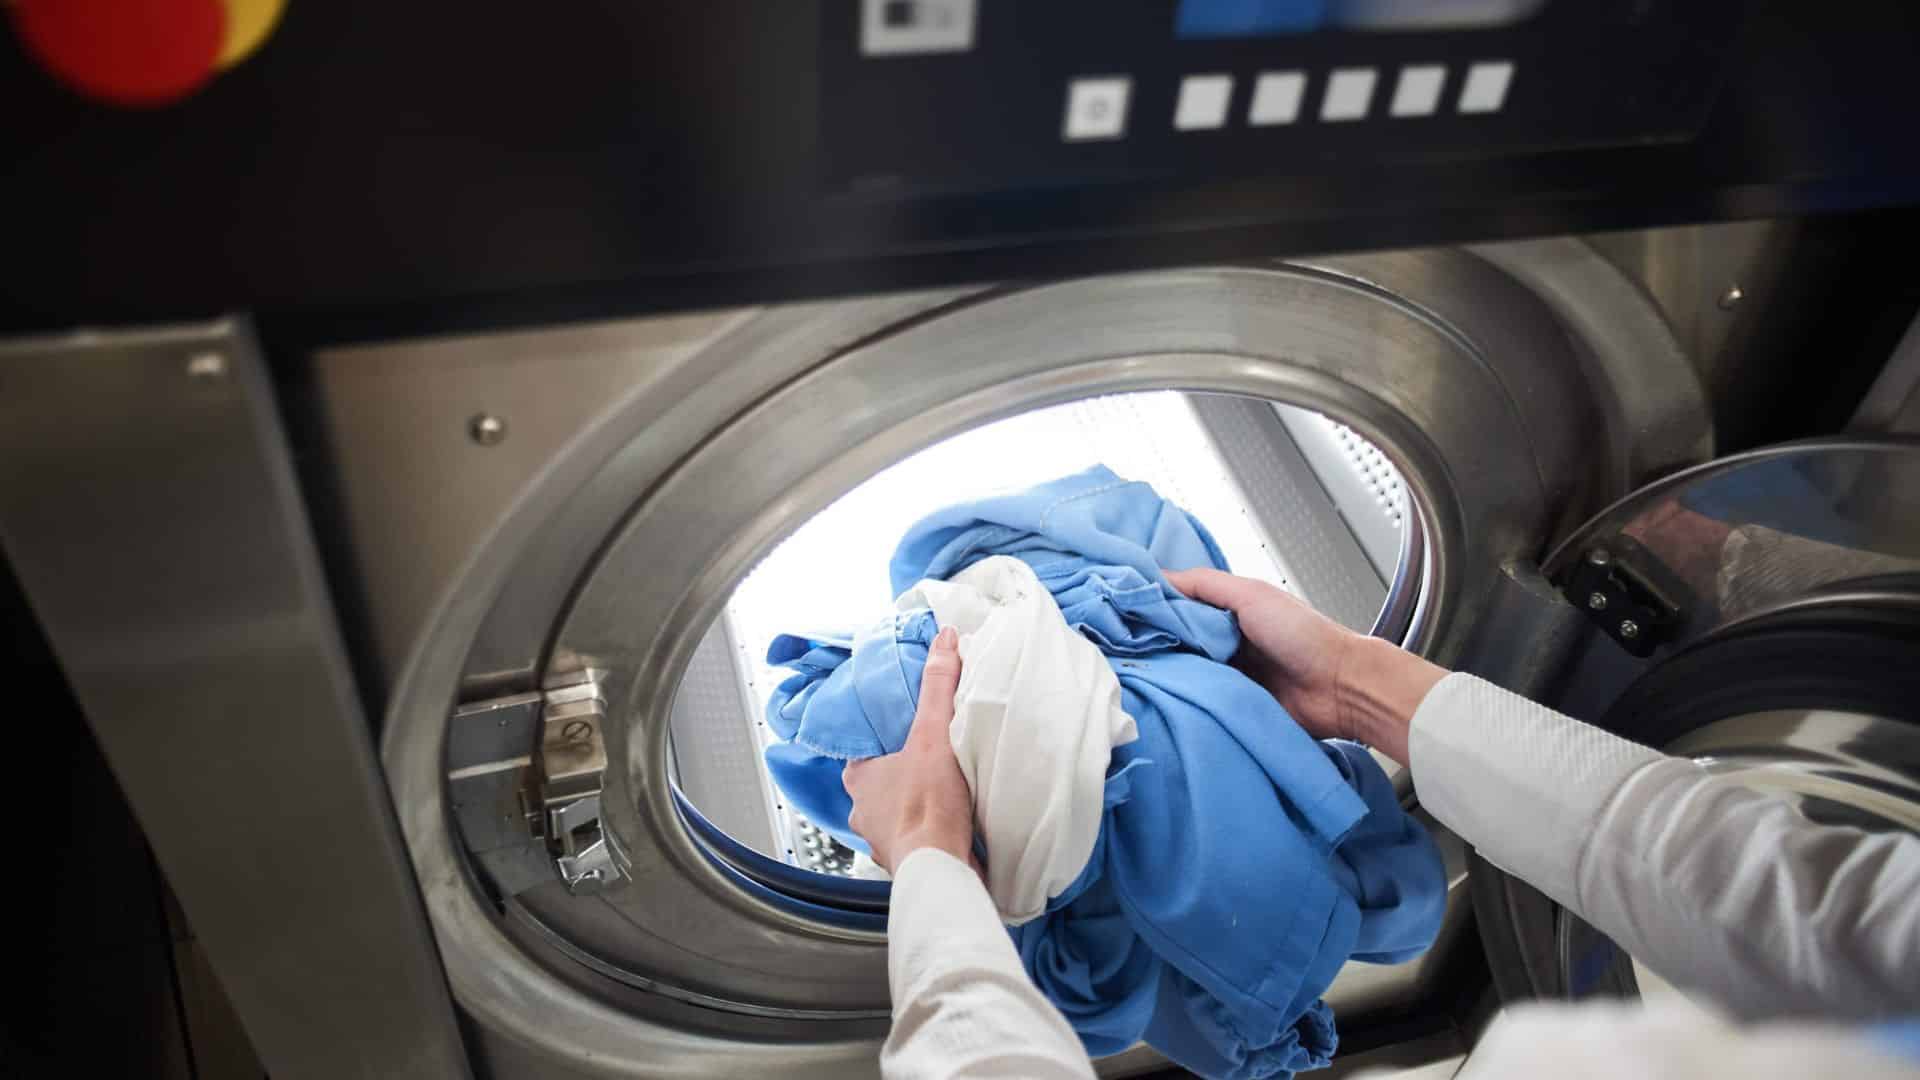 How Does Expert Laundry Service Prolong Your Clothes’ Life?